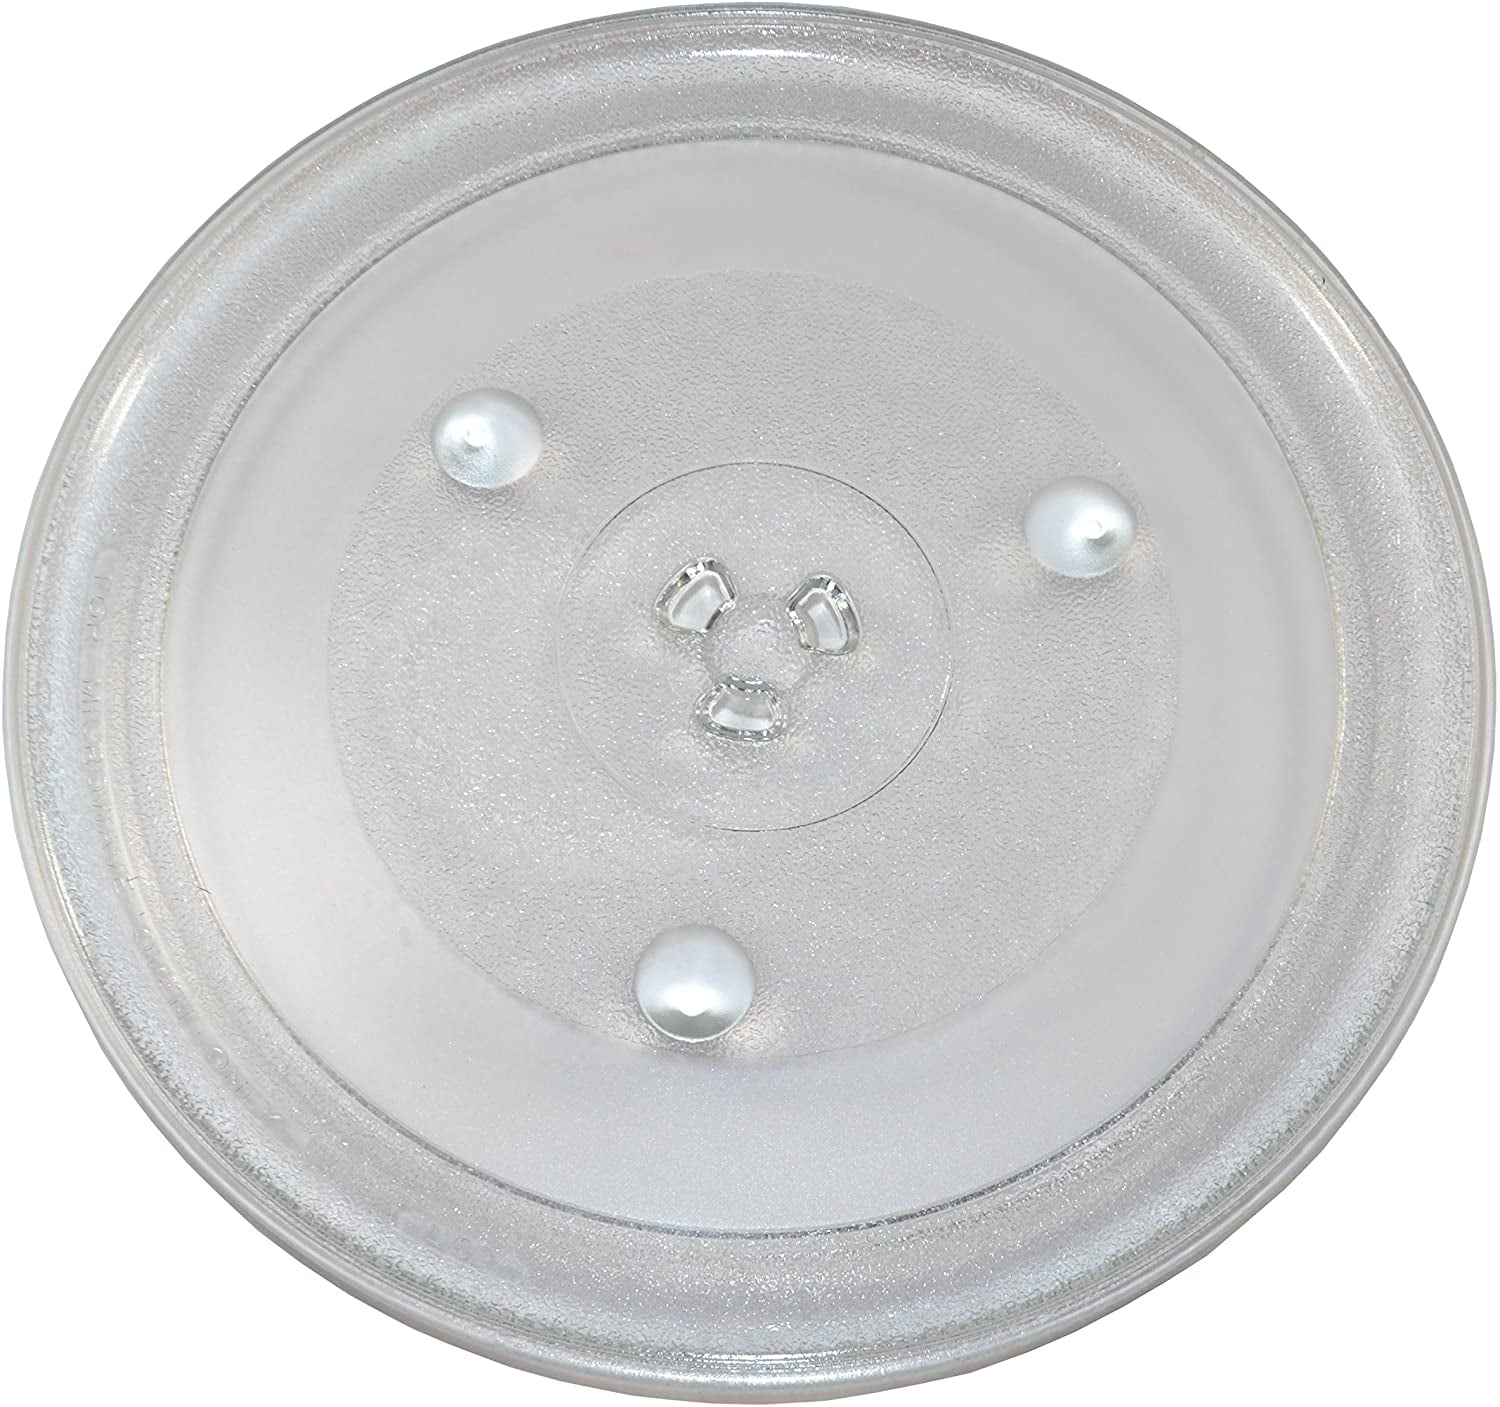 UNIVERSAL MICROWAVE OVEN GLASS ROUND TURNTABLE PLATE DISH 315mm 3 FIXING HOLES